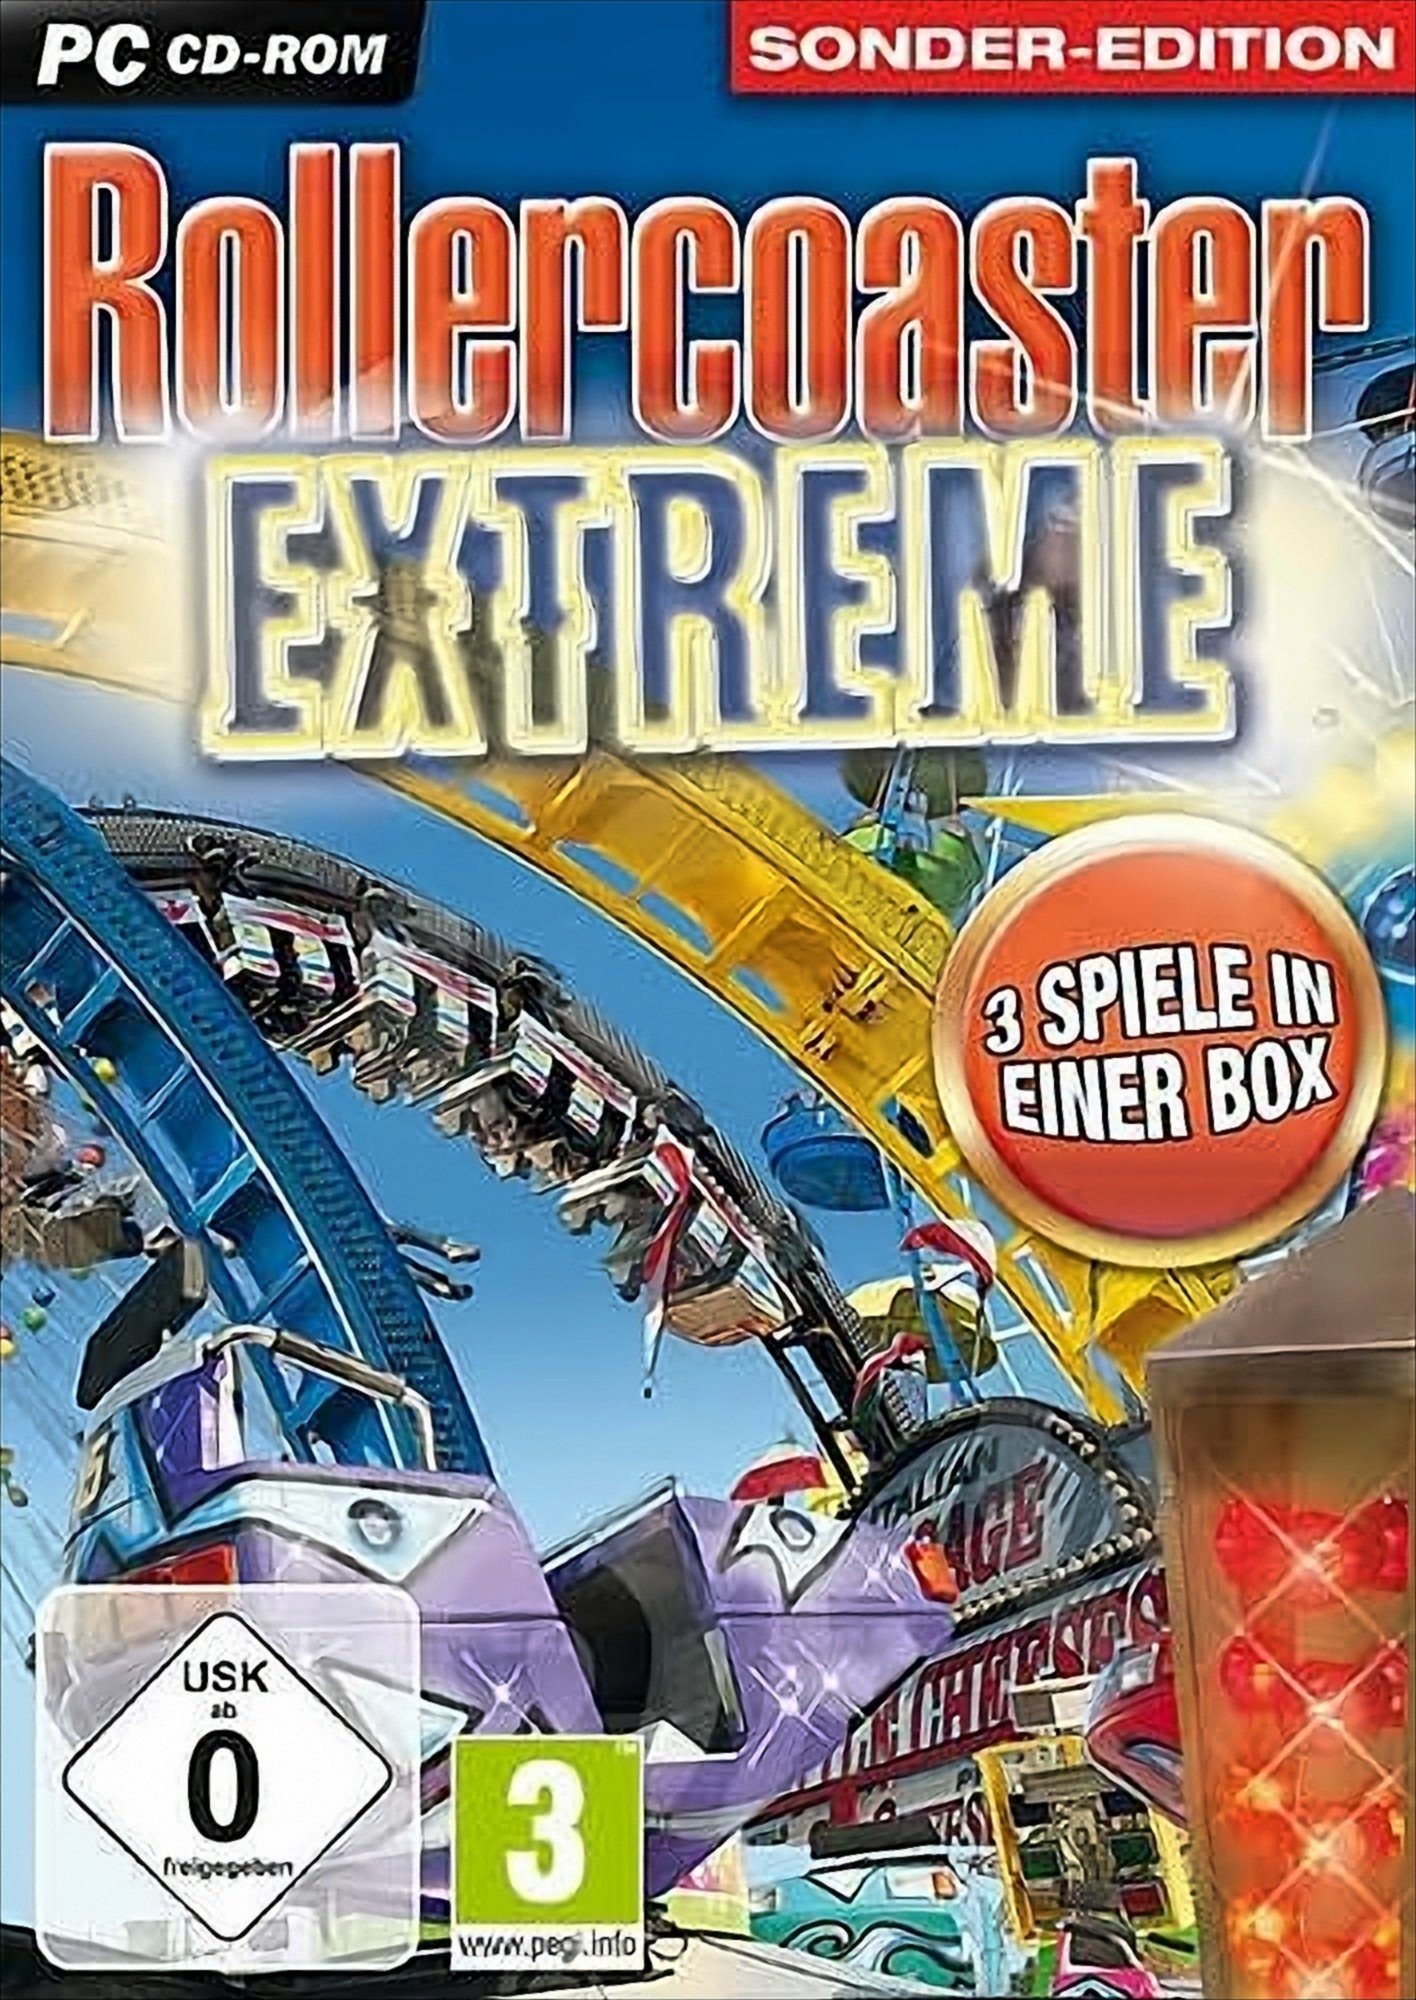 Rollercoaster Extreme - Sonderedition PC